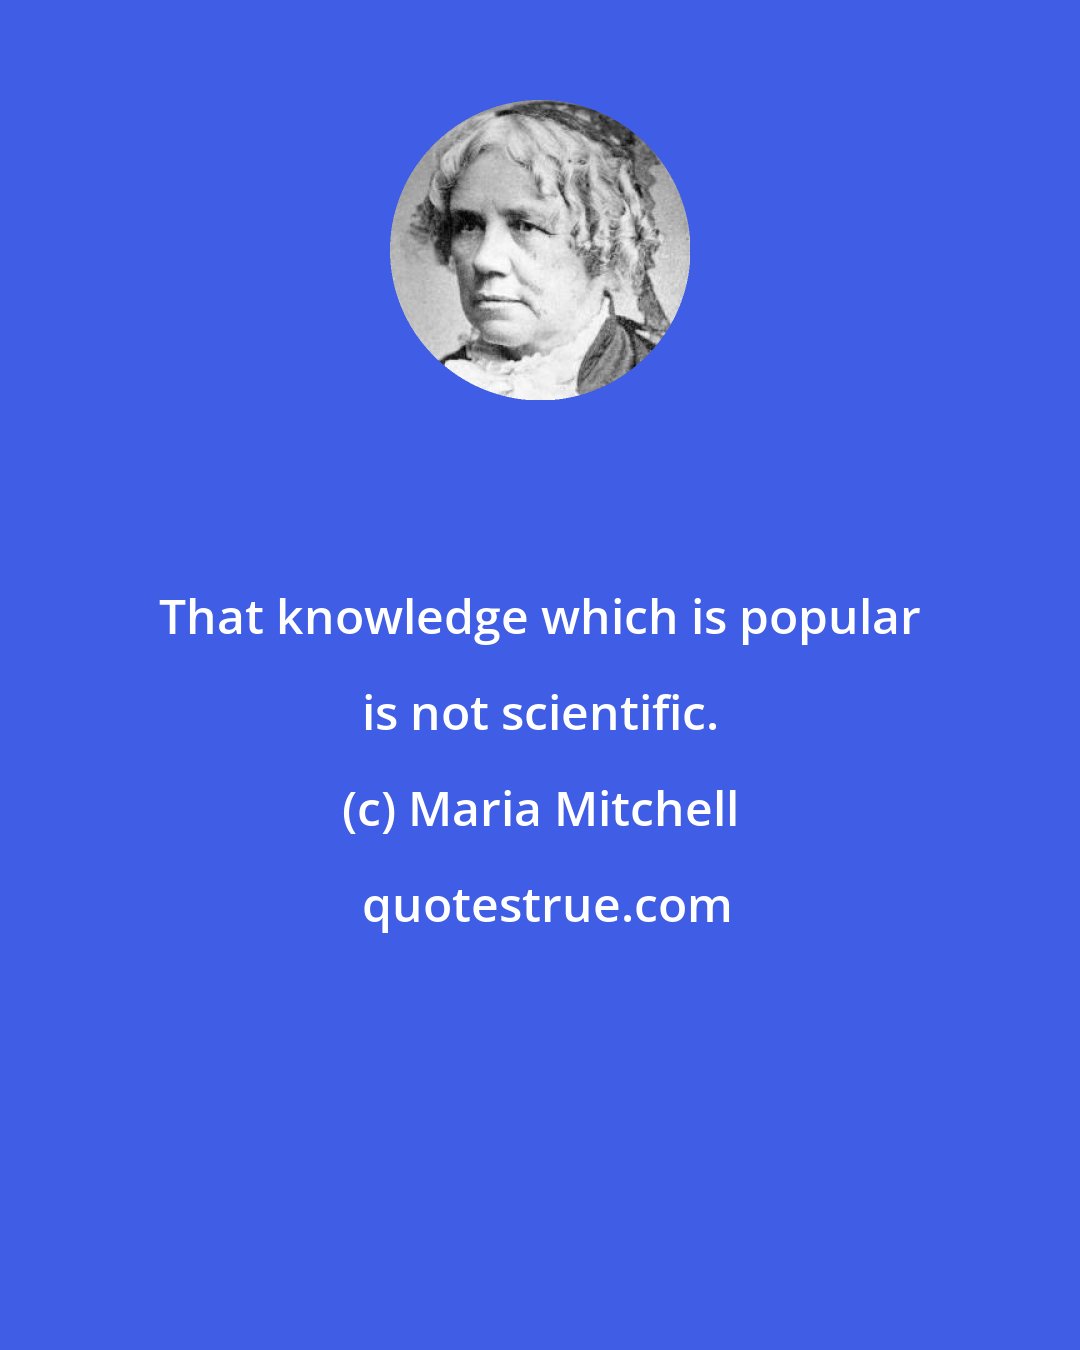 Maria Mitchell: That knowledge which is popular is not scientific.